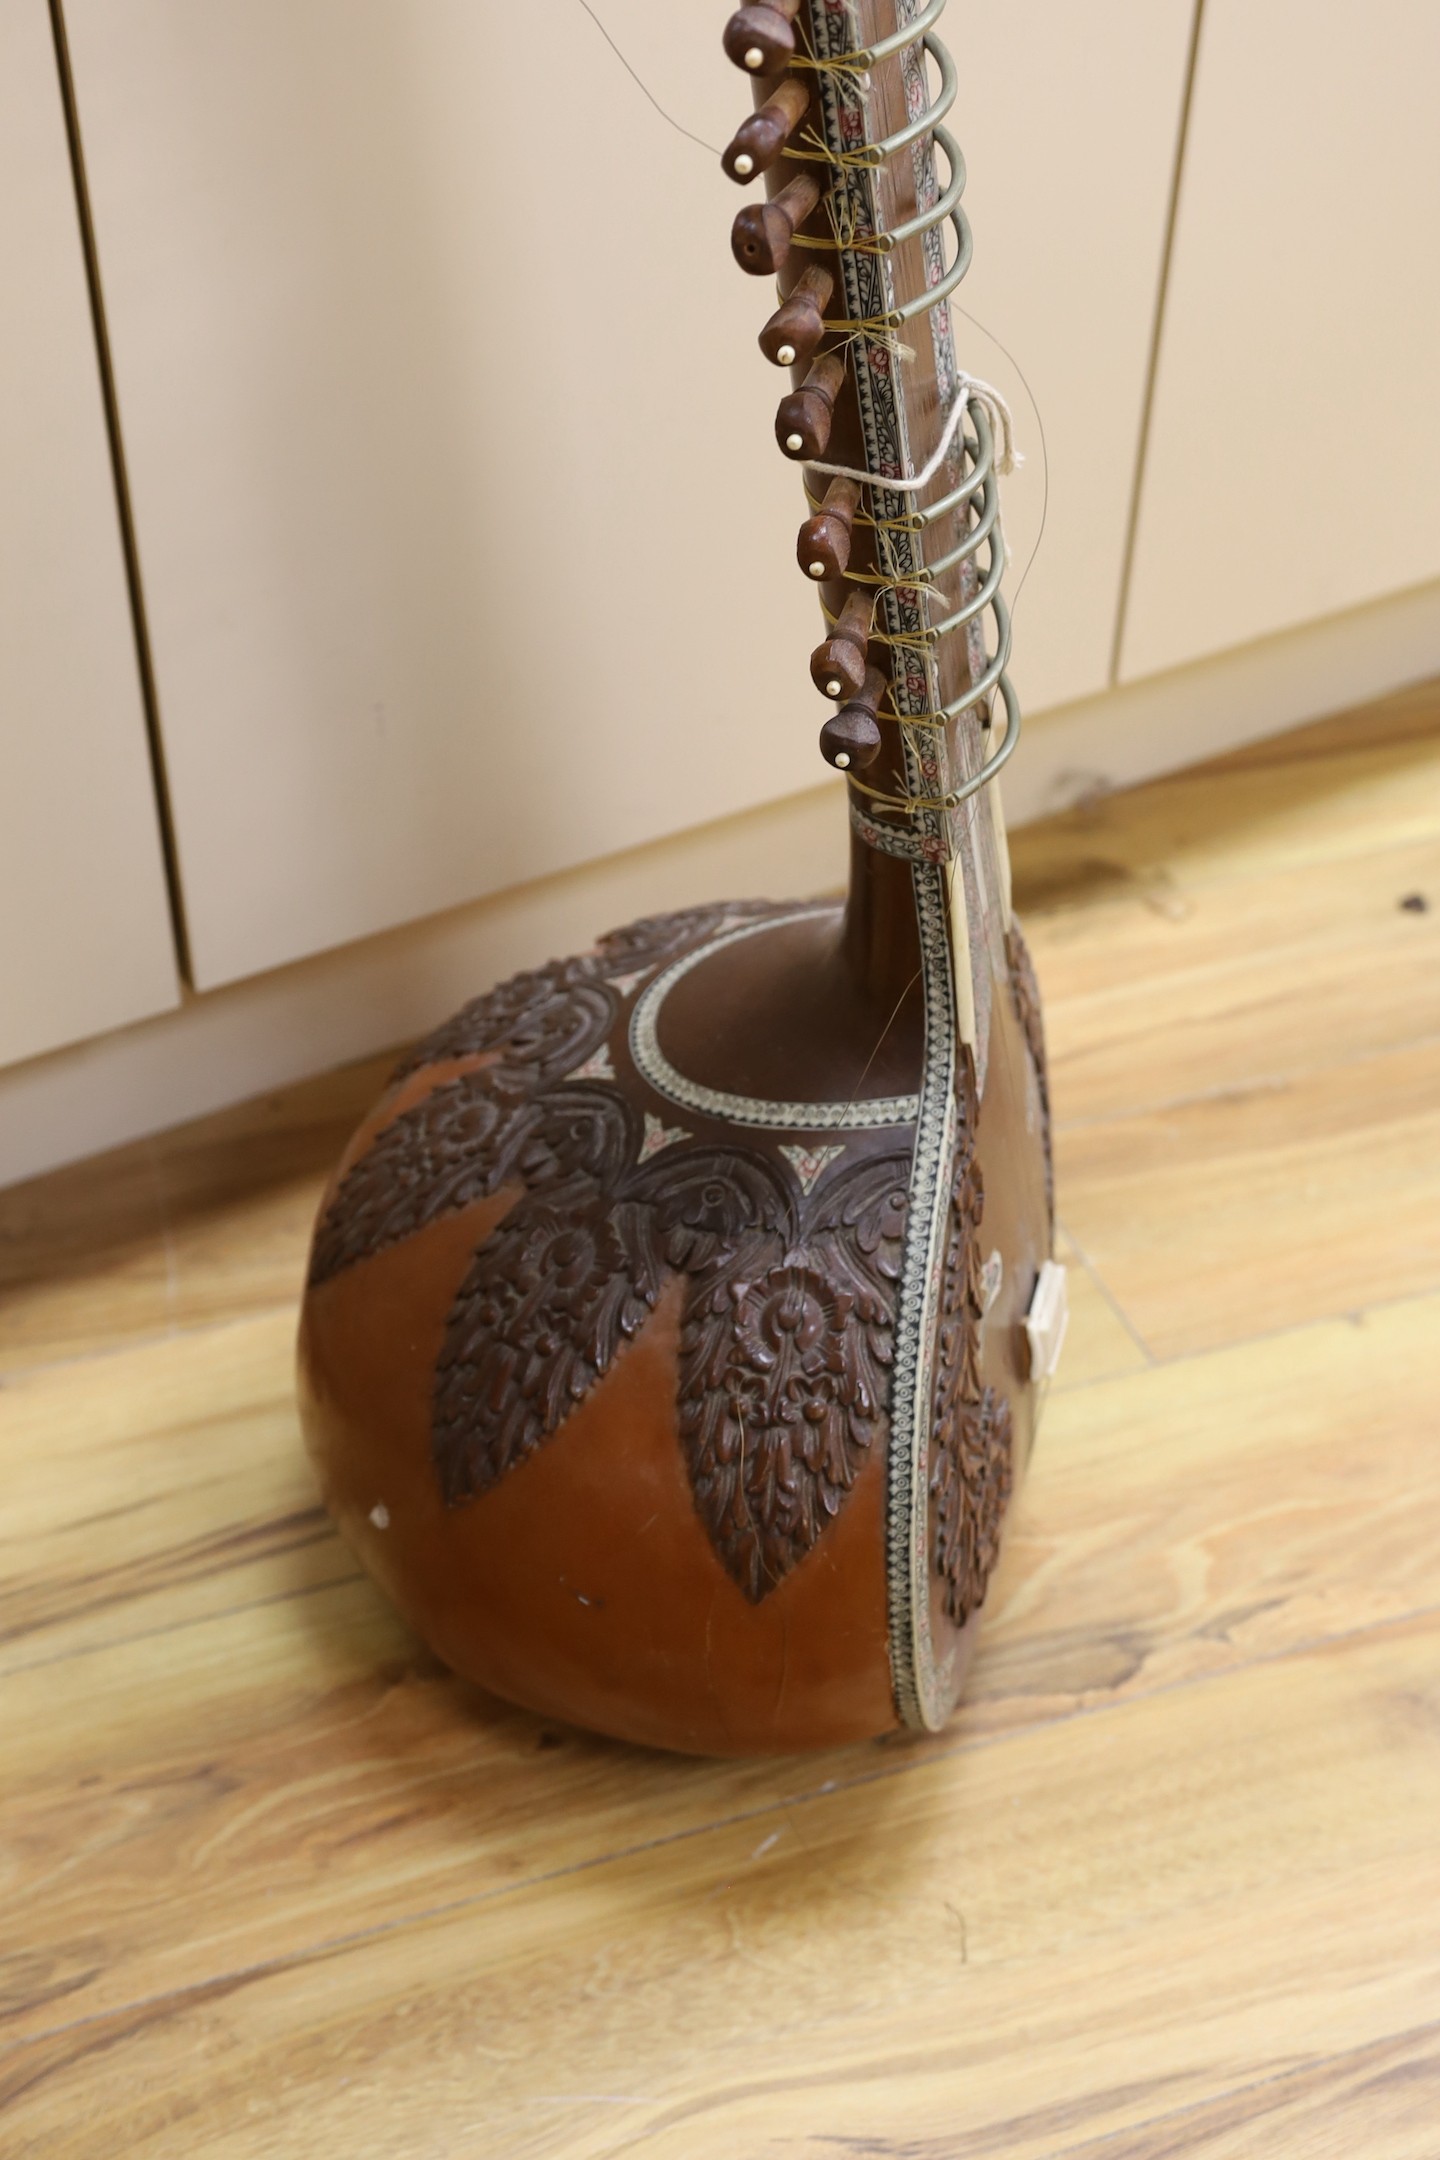 A sitar with wooden carved decoration